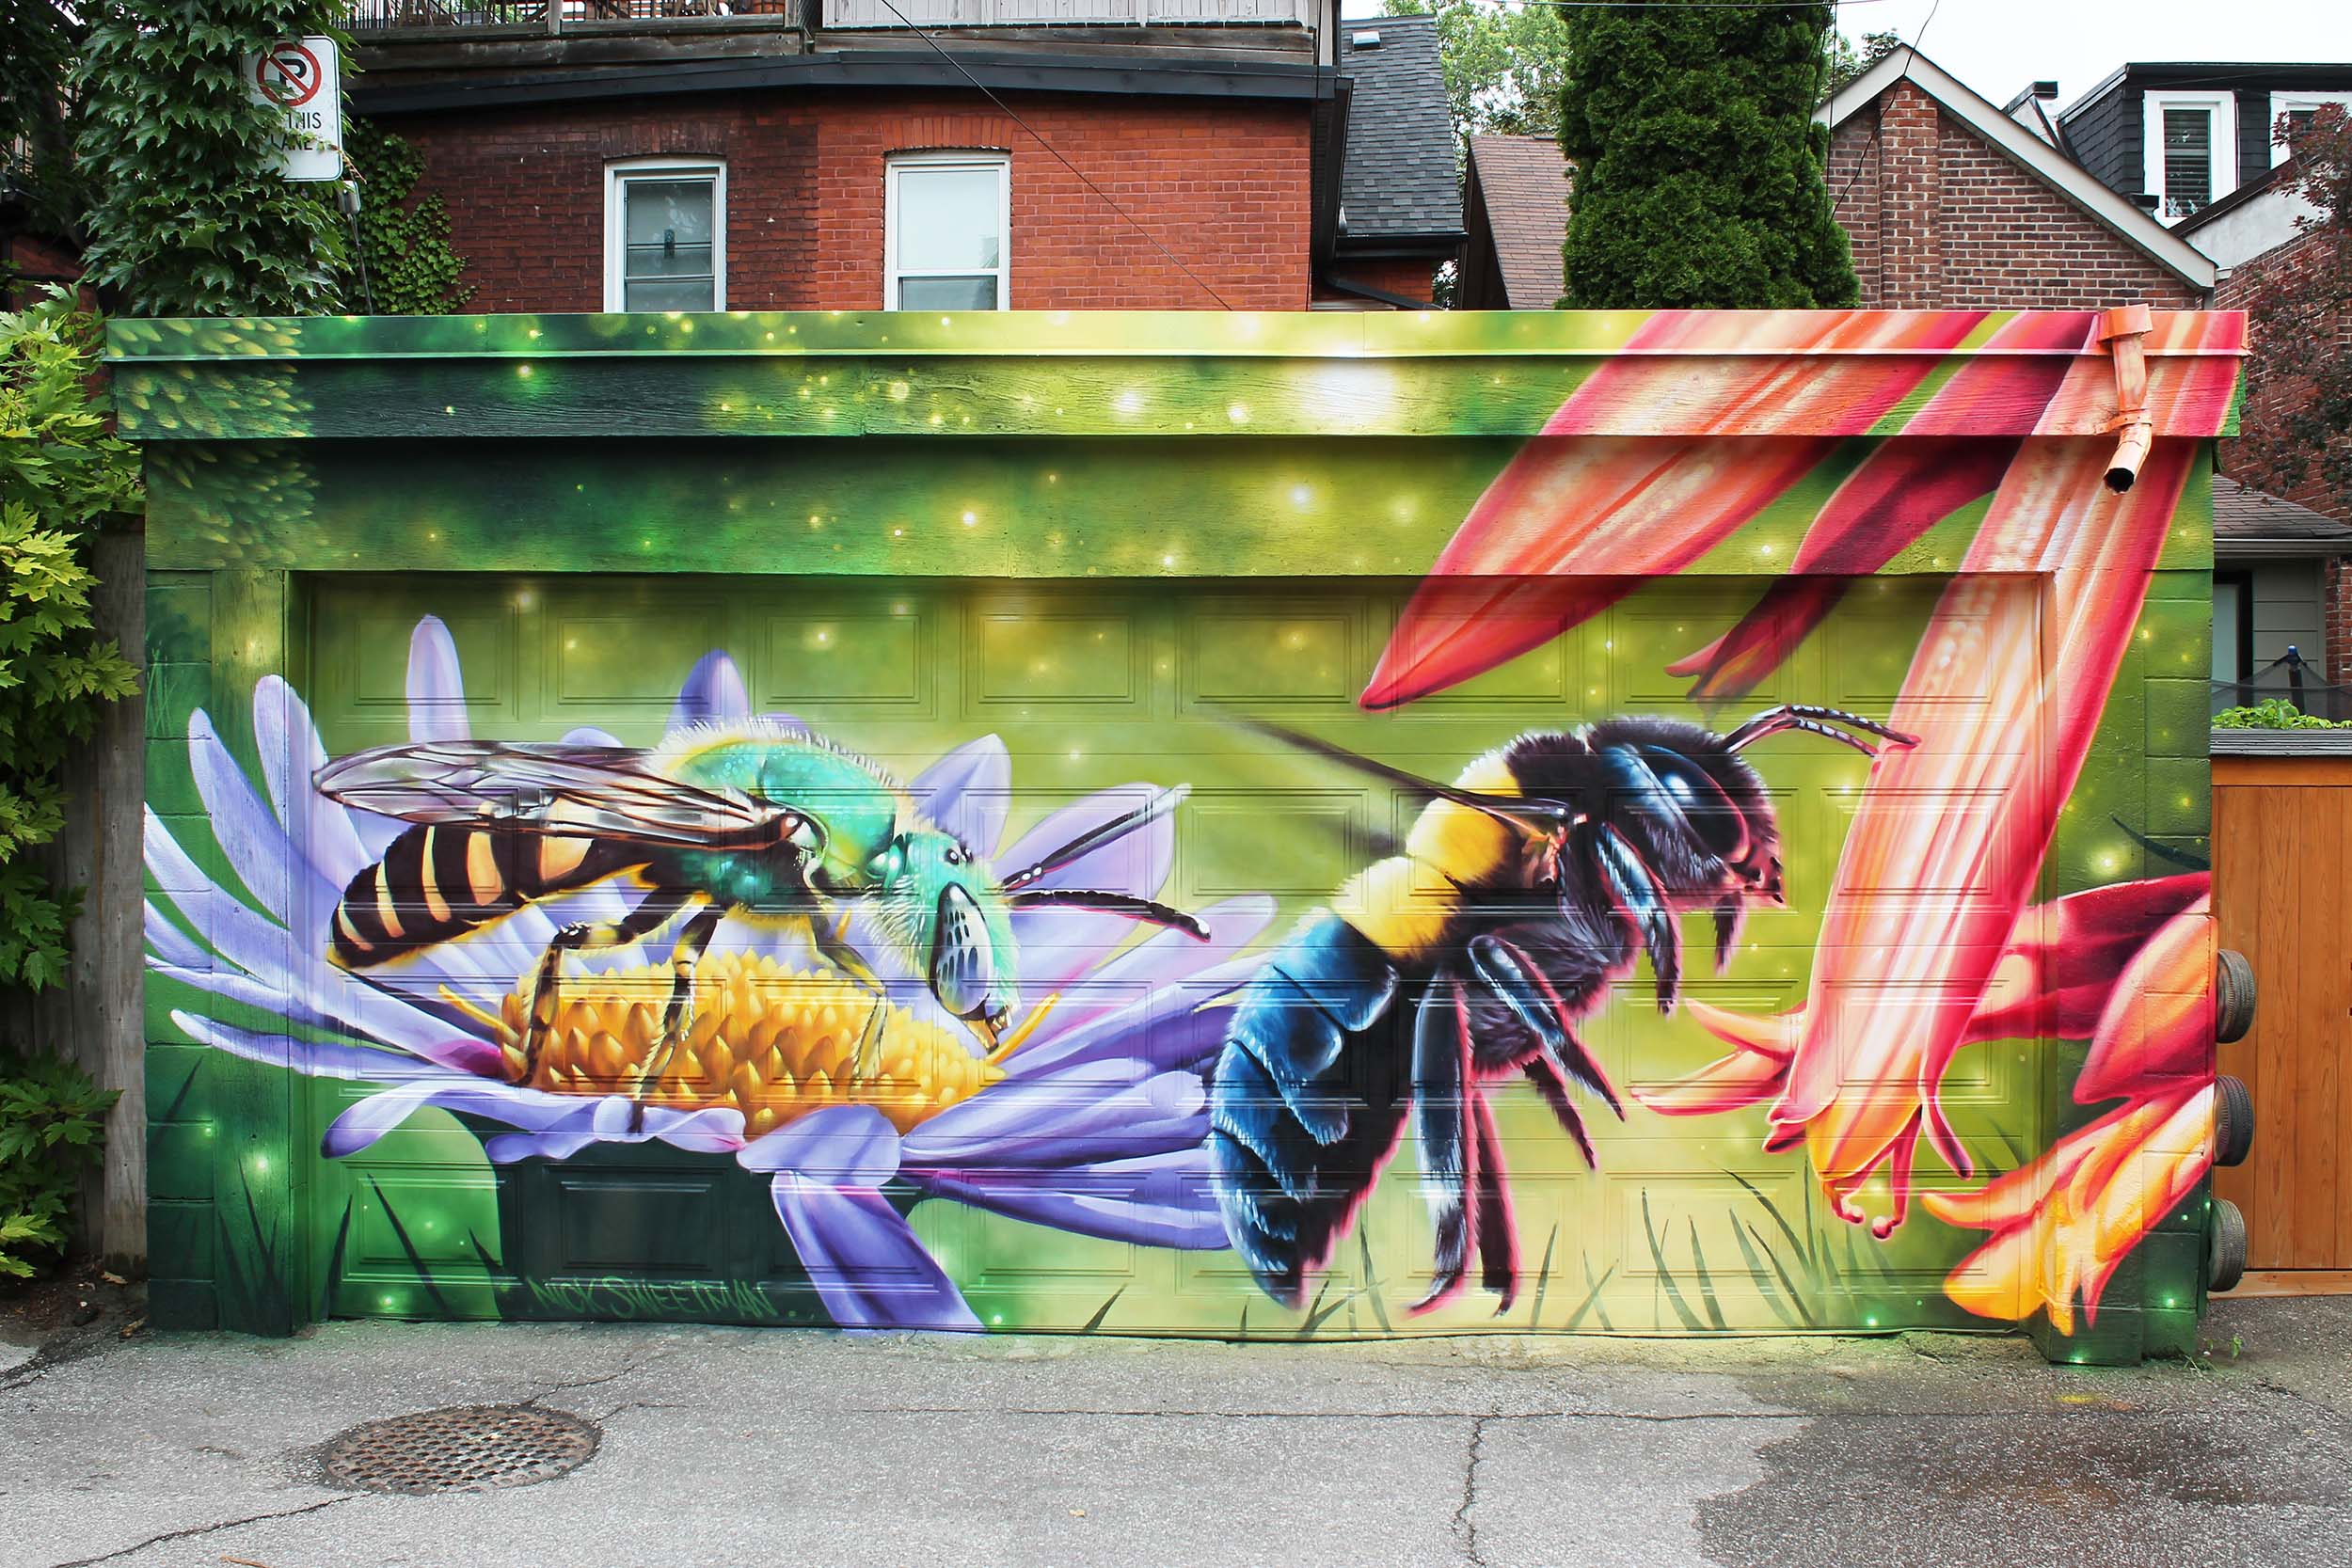 A city garage painted with a mural of bees